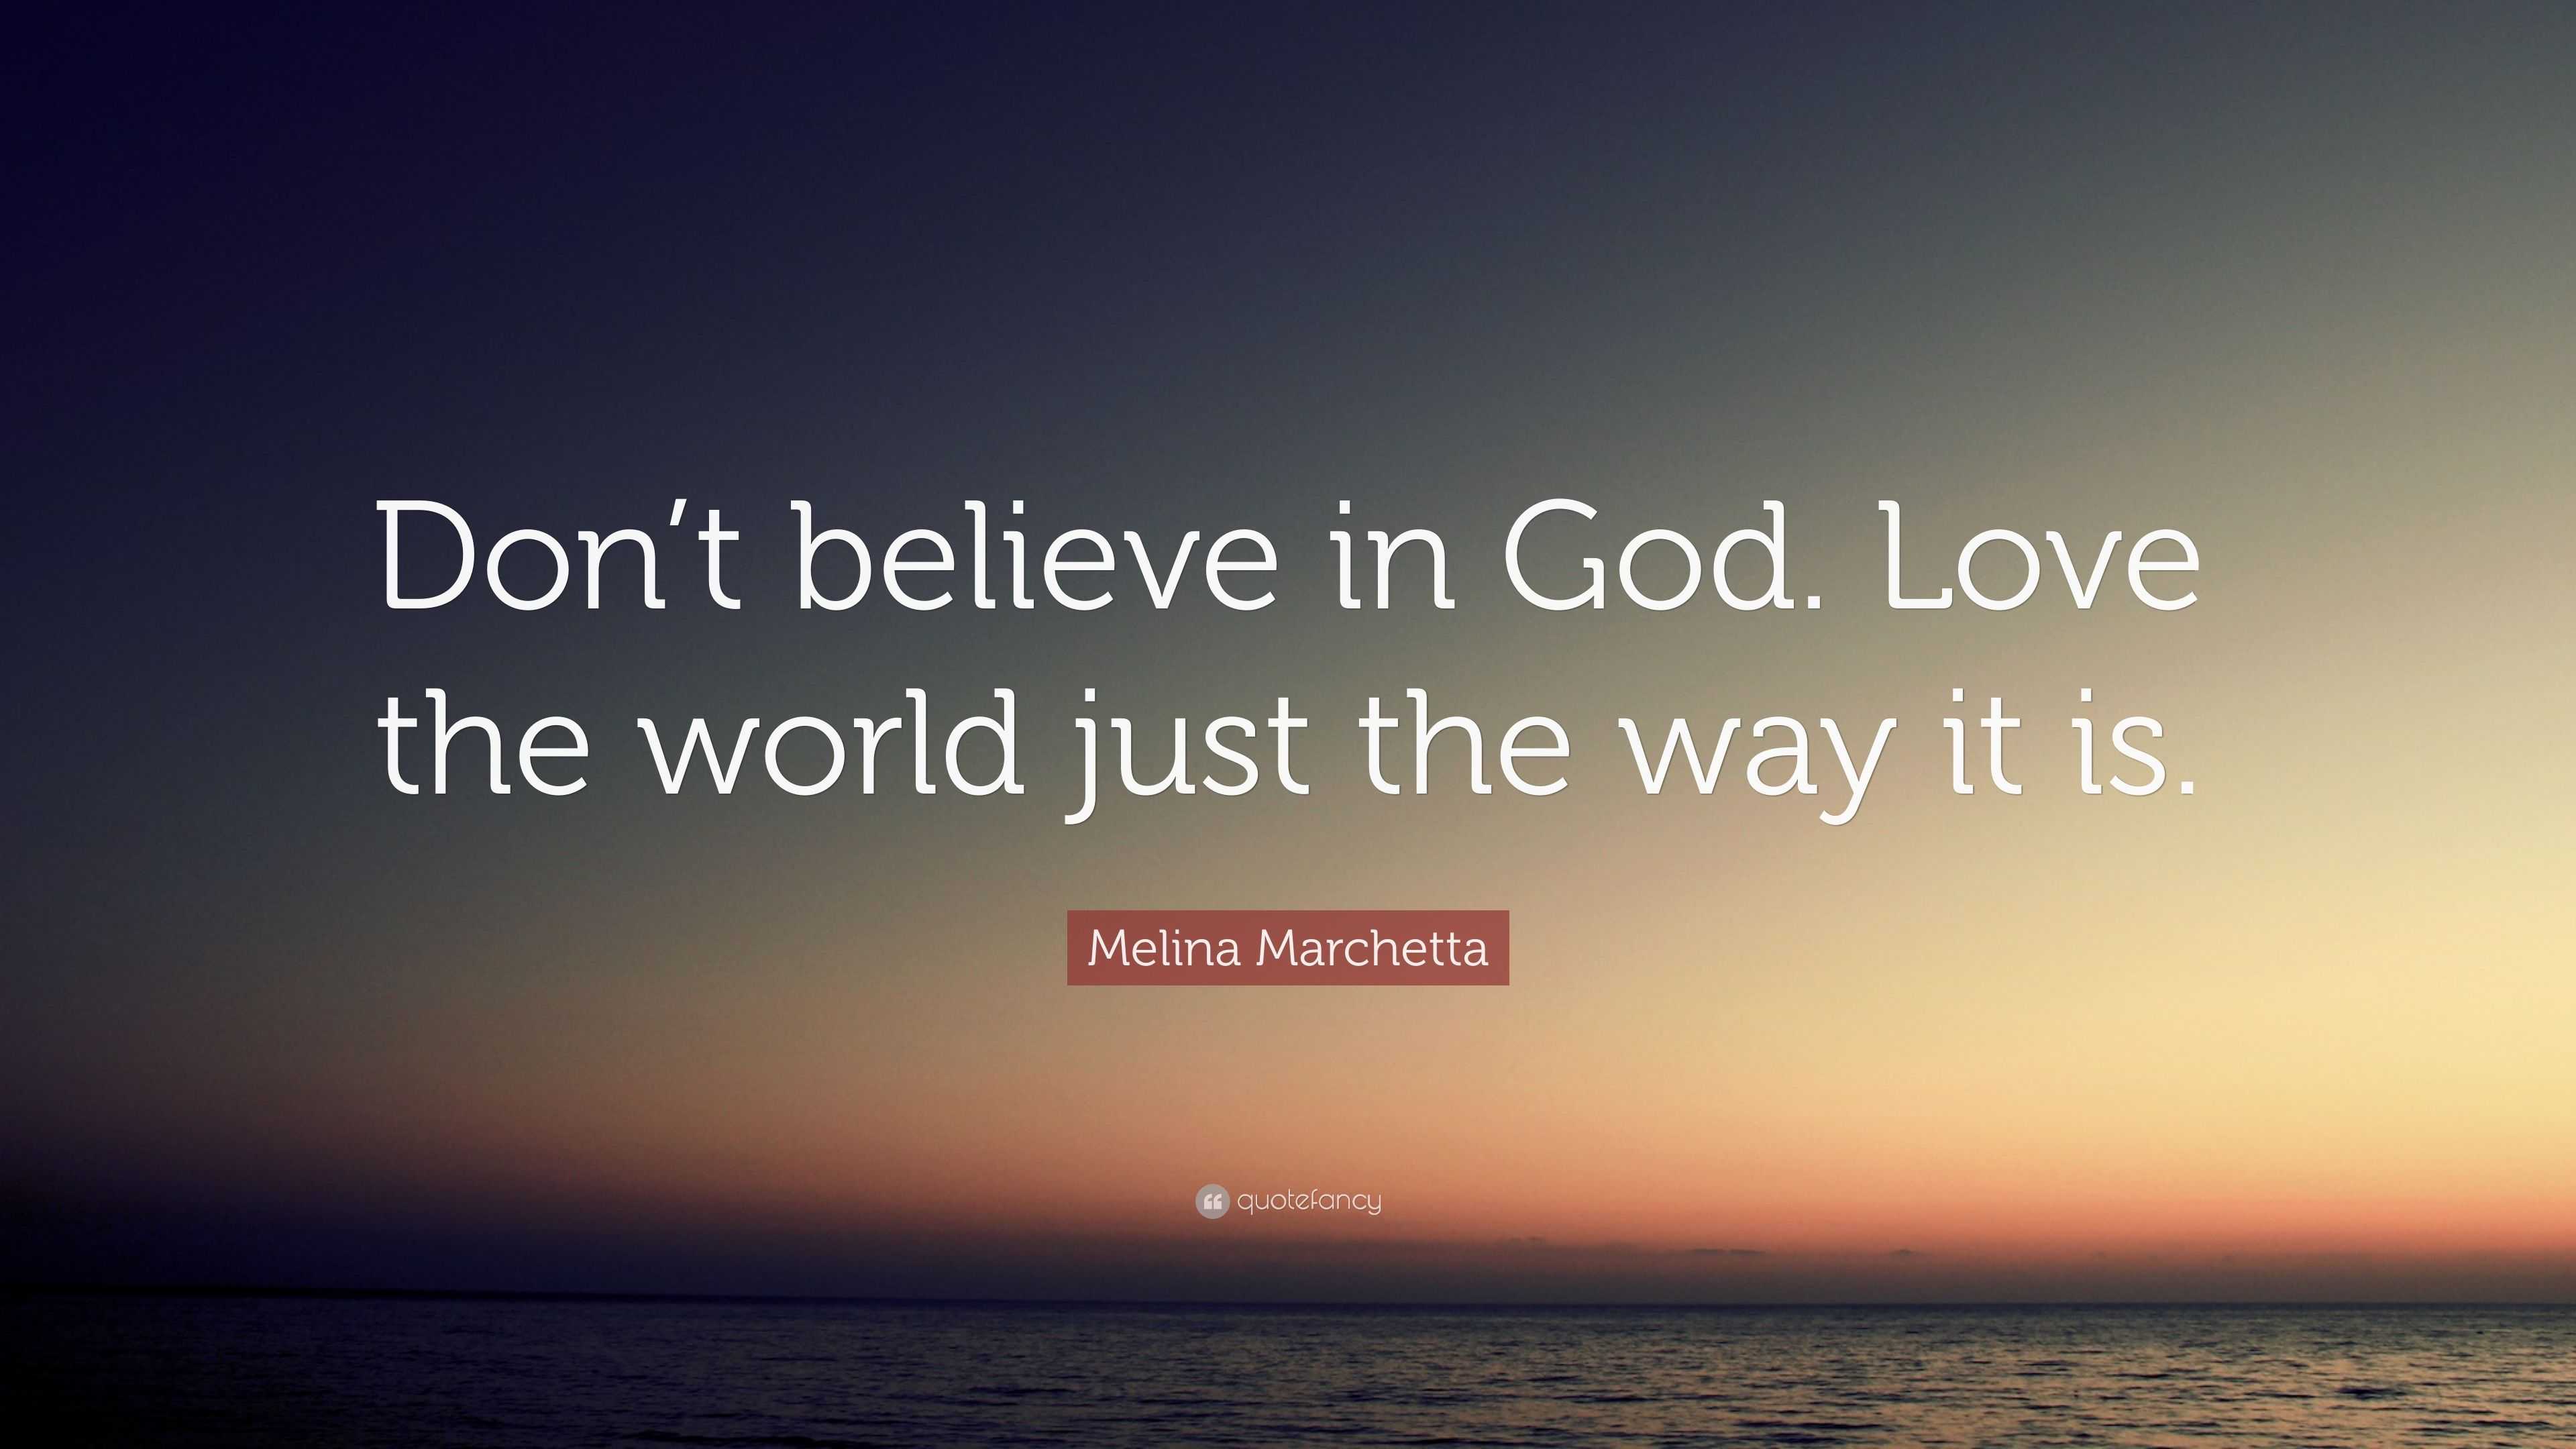 Melina Marchetta Quote “Don t believe in God Love the world just